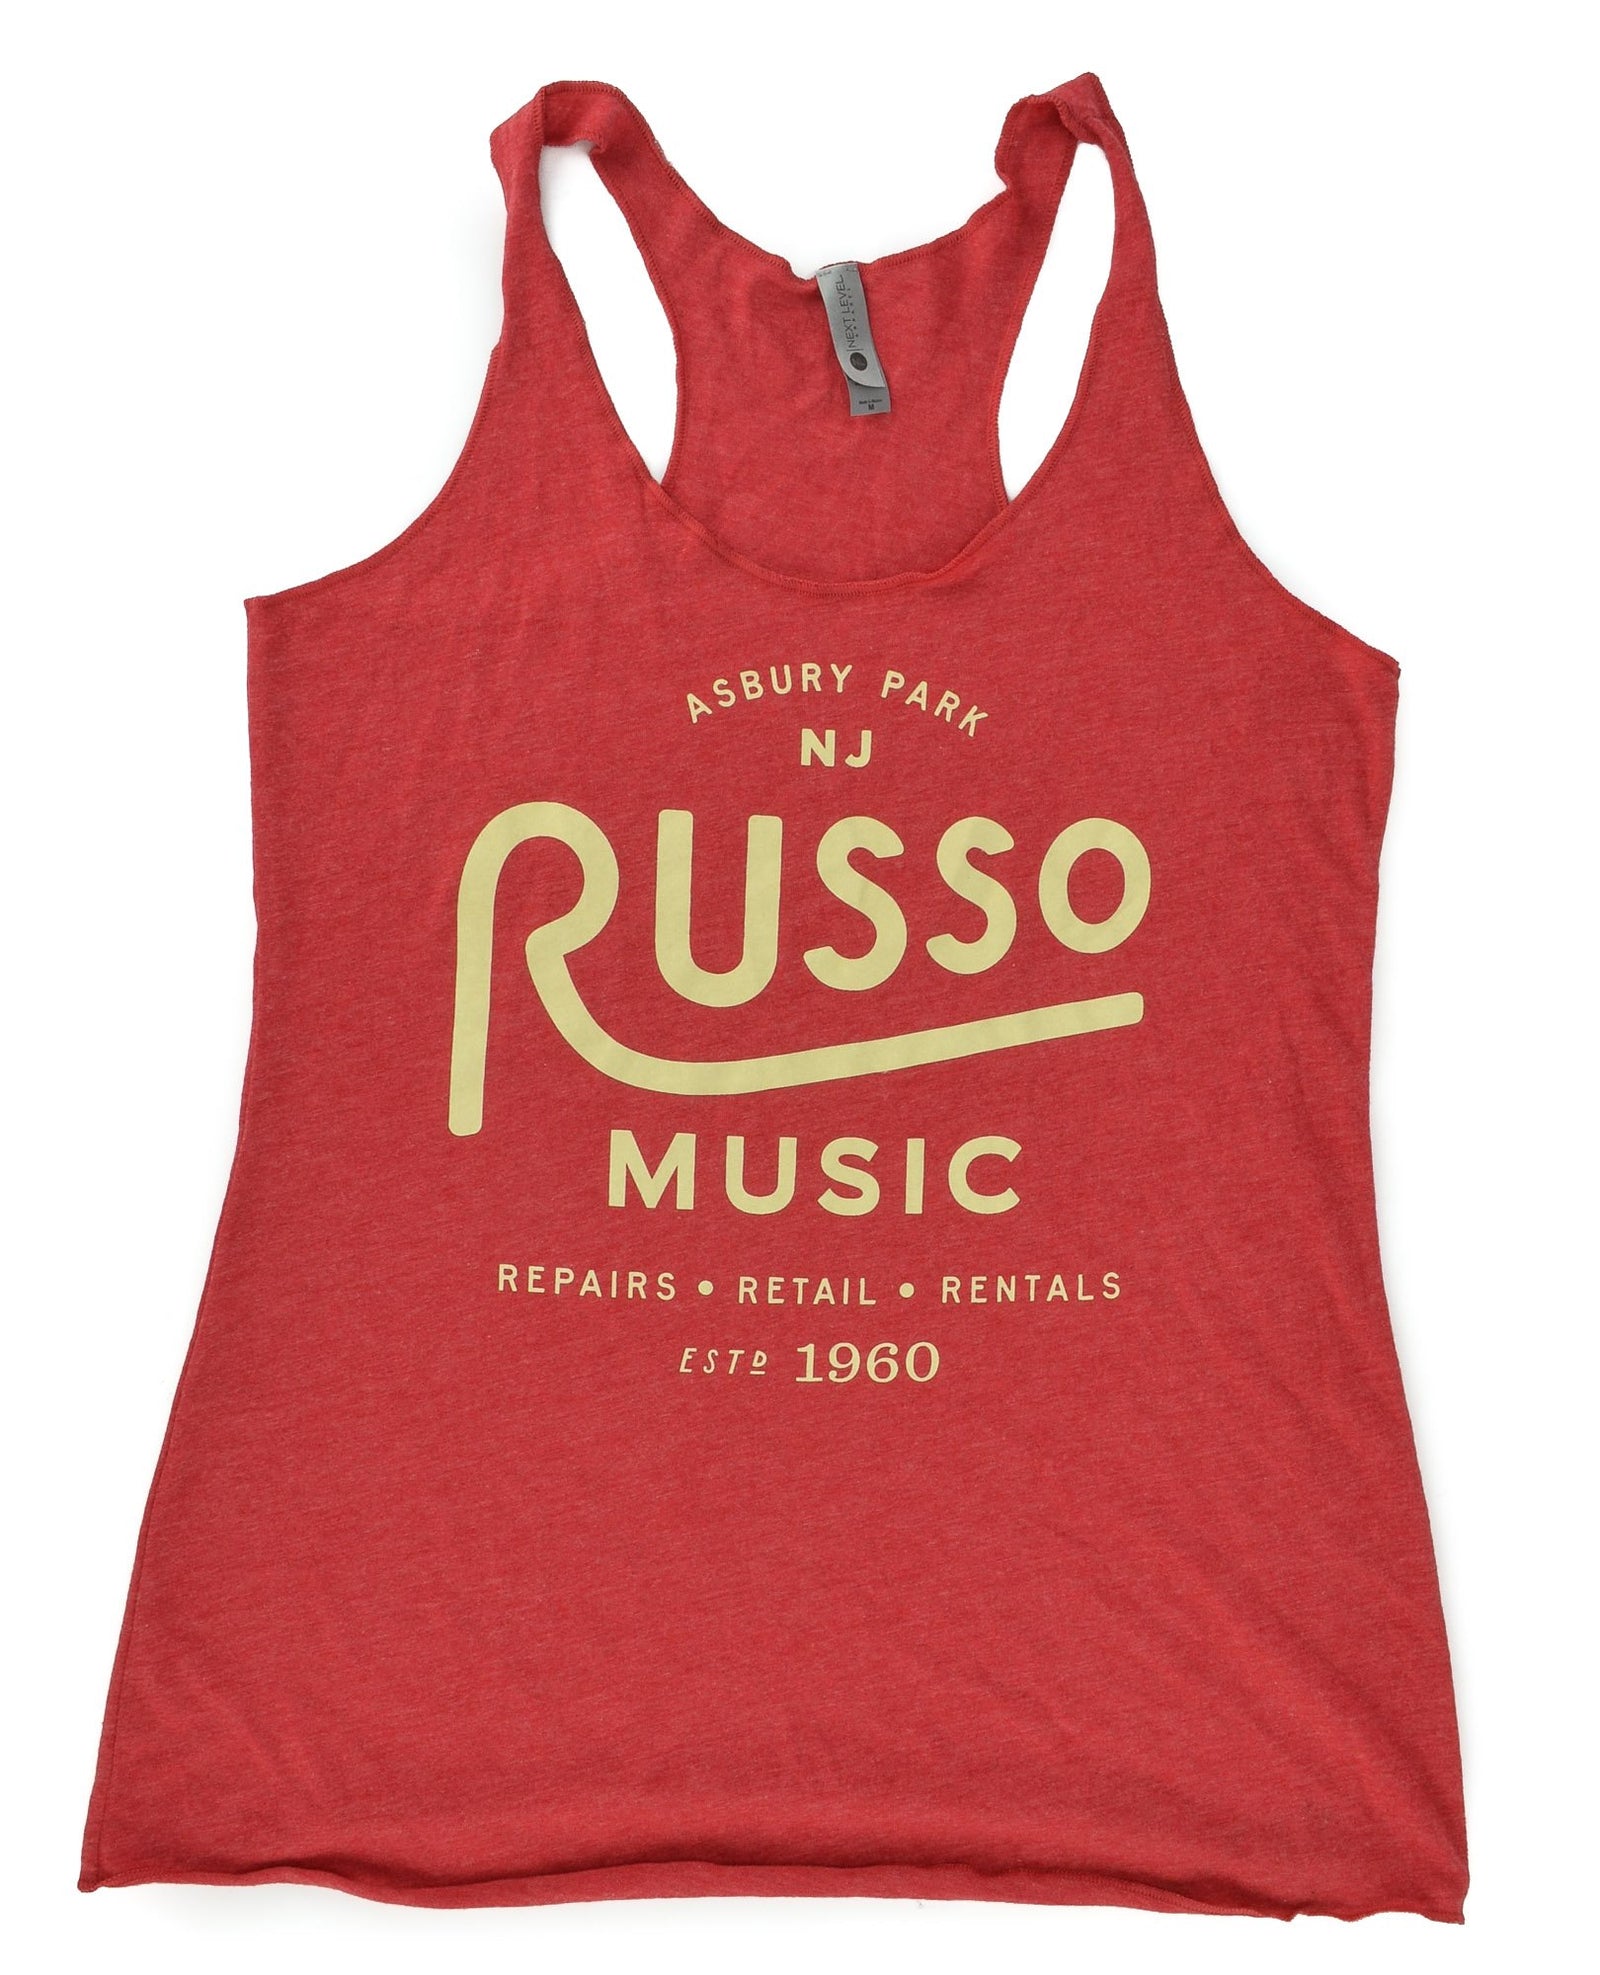 Russo Music 'Asbury Park' Racer Back Tank Top - Heather Red